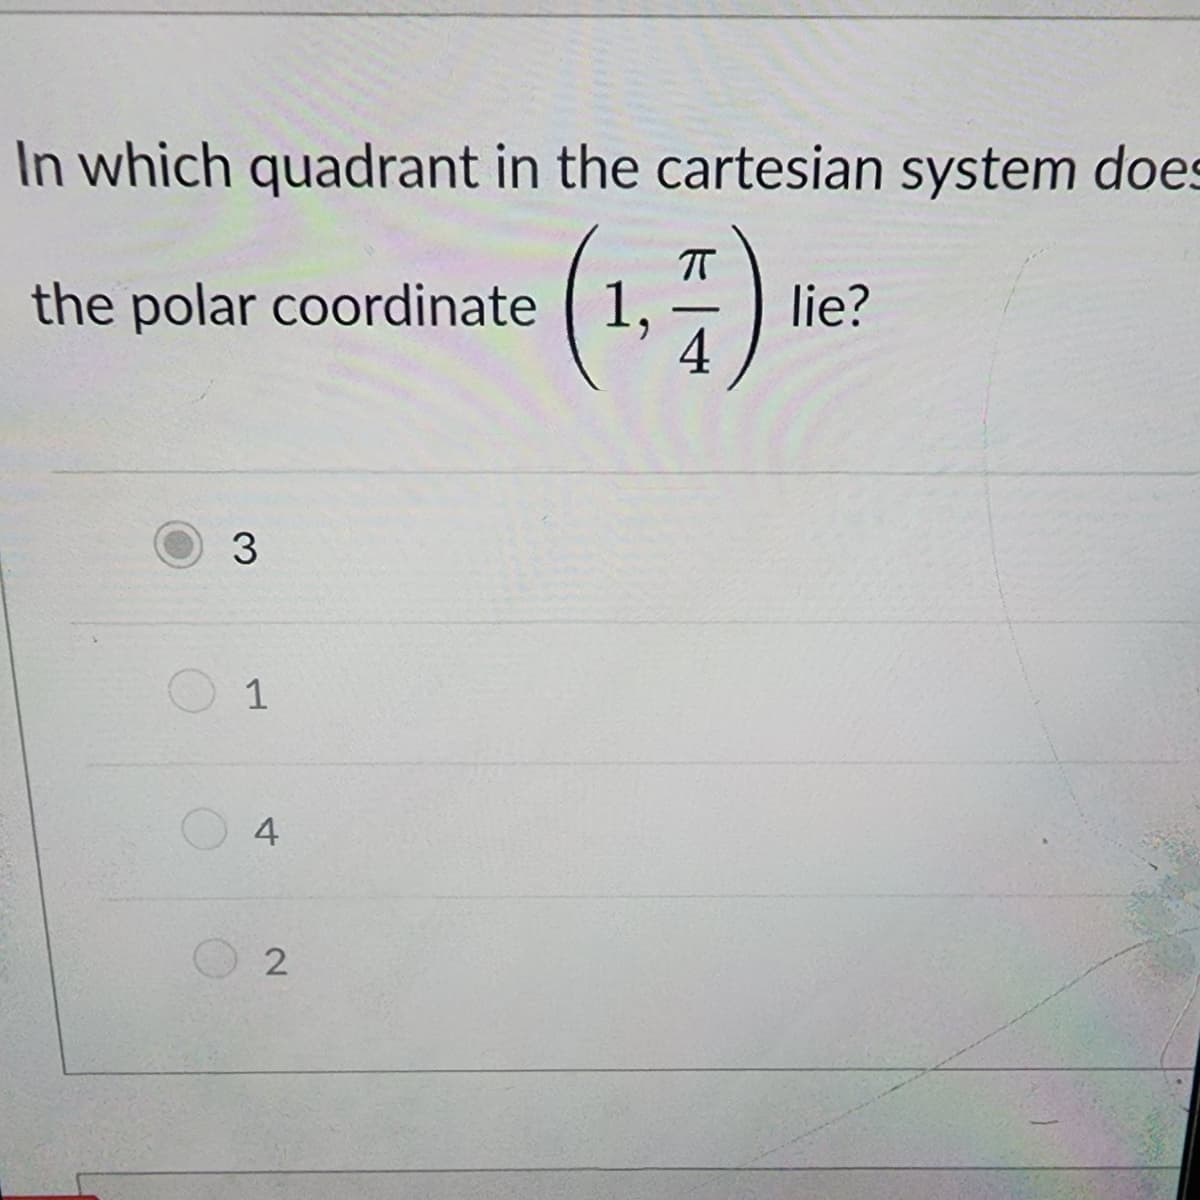 In which quadrant in the cartesian system does
the polar coordinate (1,7)
3
1
4
2
lie?